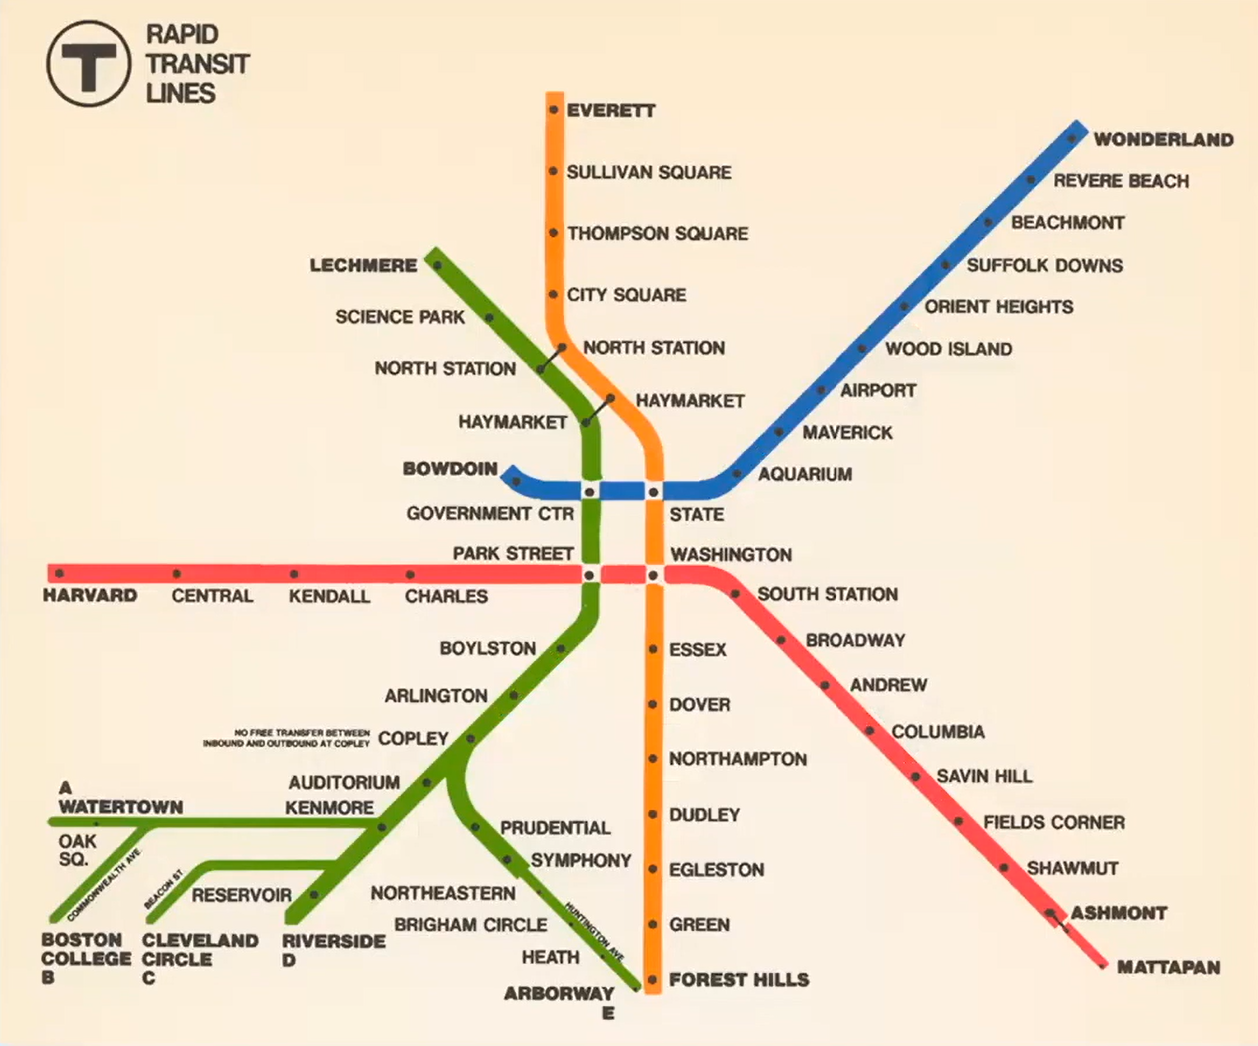 The first of the so-called MBTA "spider maps" shows the Orange Line from Everett to Forest Hills running vertically down the center. The Green Line begins at Lechmere and splits into five branches with the now-defunct A Branch ending at Watertown. The Red Line begins at Harvard Square at left and ends at Mattapan in the lower right, and doesn't break into the two southern branches that came later. Finally, the blue line runs from Bowdoin near the center of the map to Wonderland at the upper right. 